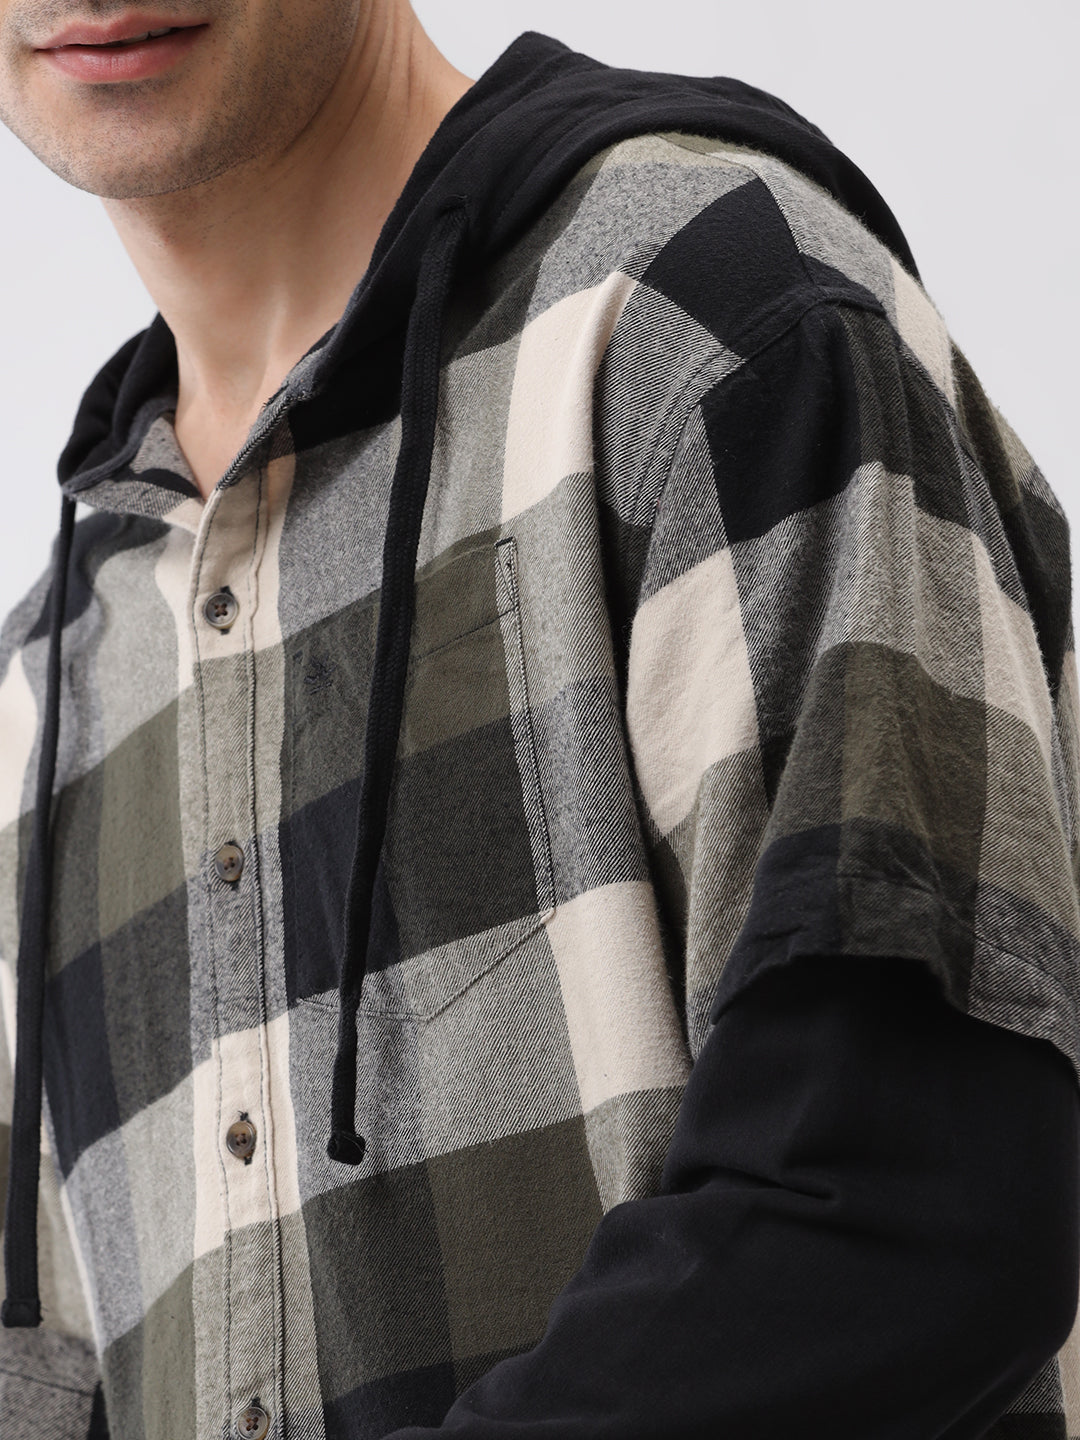 Hooded Checks Olive Boxy Fit Shirt